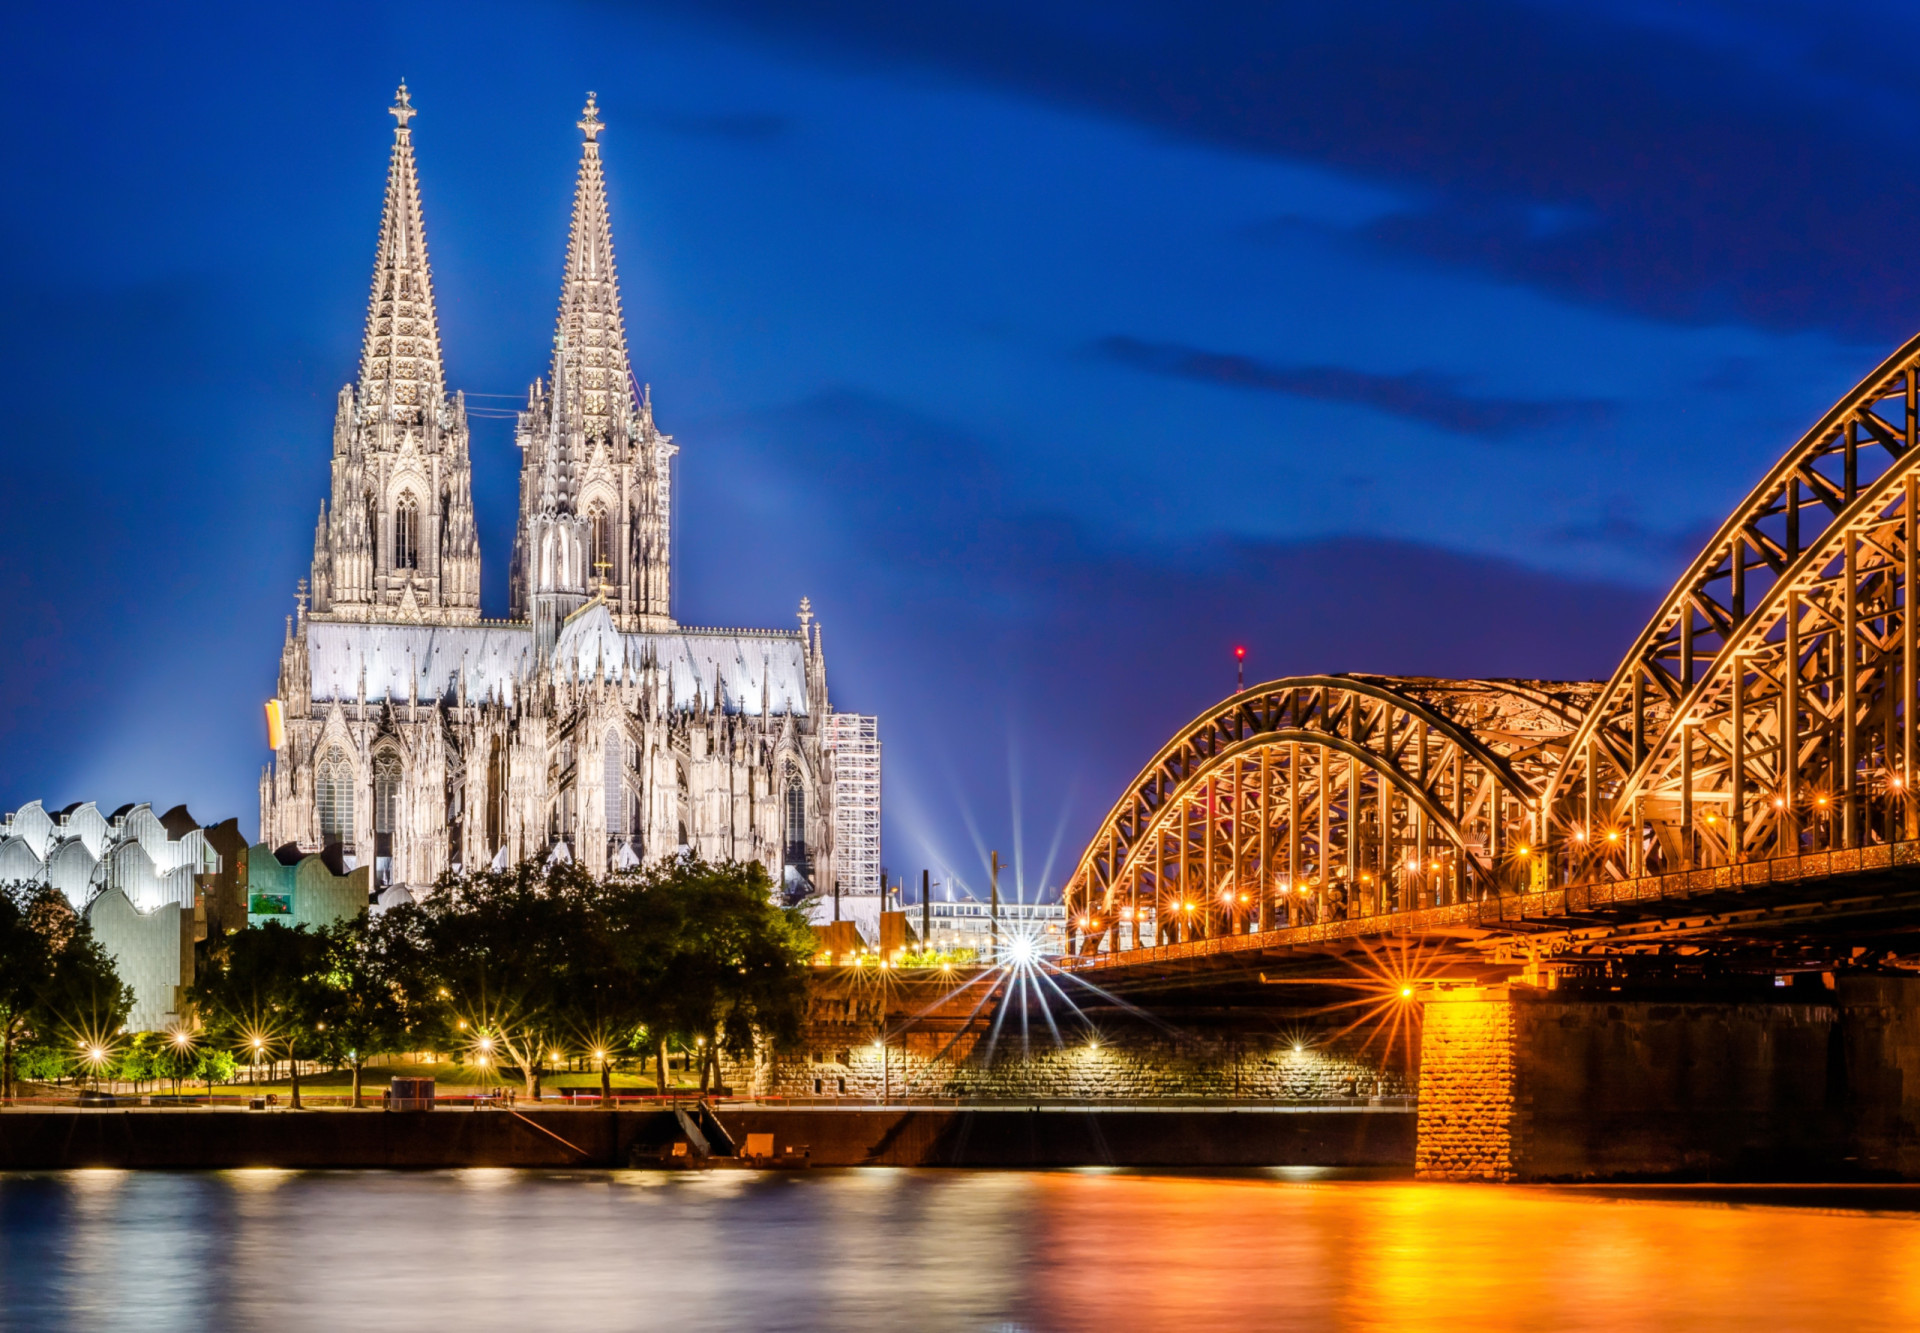 <p>Alternatively, anyone staying in Cologne has the city's stunning medieval cathedral to explore between fixtures. This is the tallest twin-spired church in the world, and it's more than deserving of its UNESCO World Heritage Site status. So besides Germany, where else in the world is worth visiting in 2024?</p>